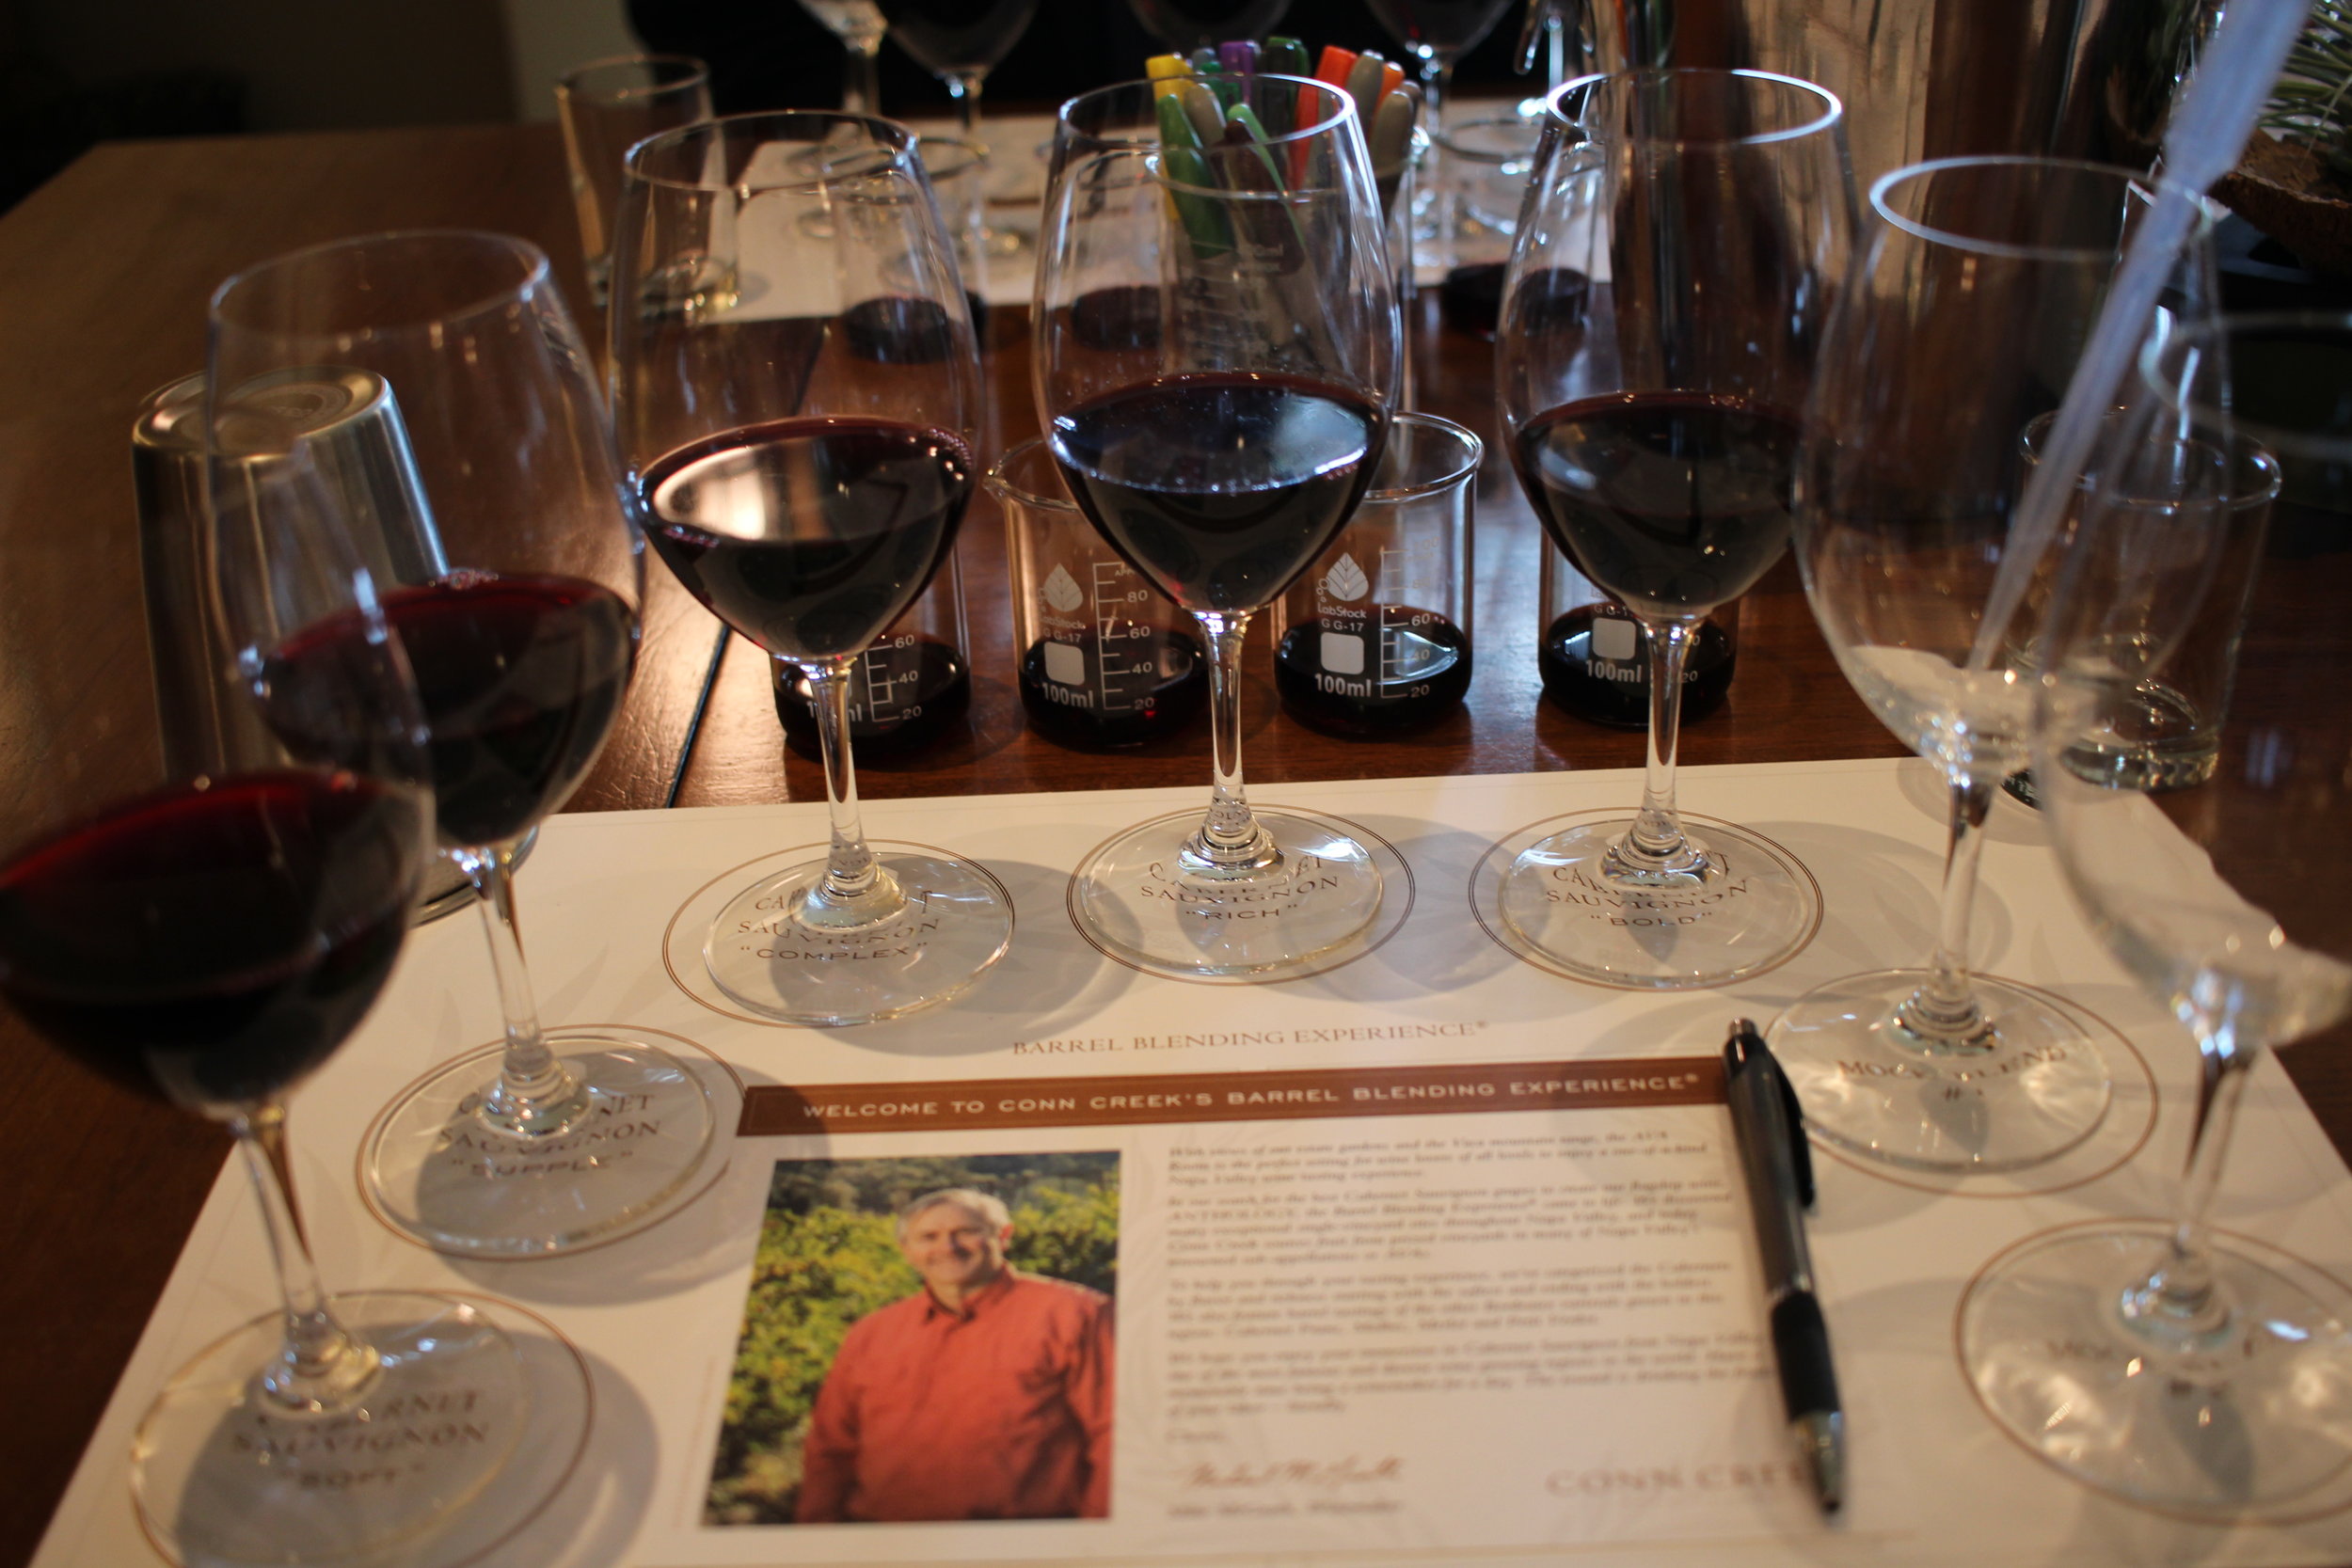 Lots of Wine at the Conn Creek Blending Experience